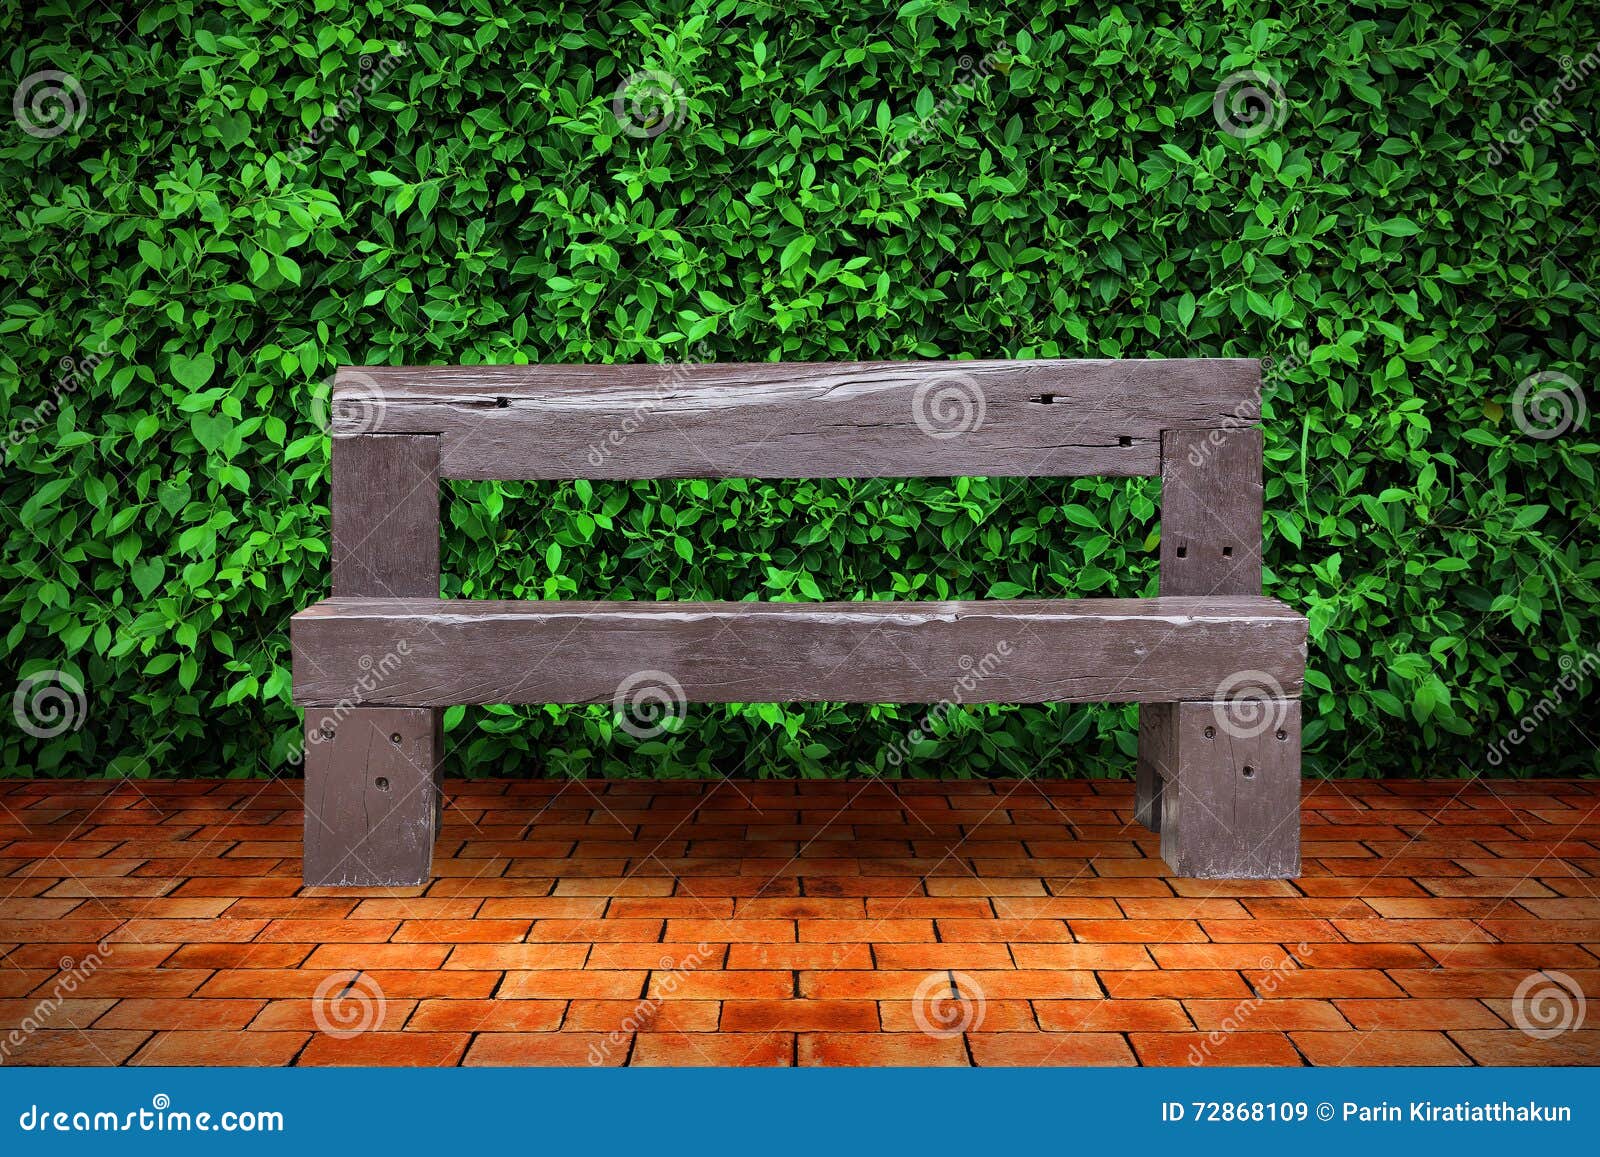 Wood Chair with the Bush Background. Stock Image - Image of shrub, seat:  72868109